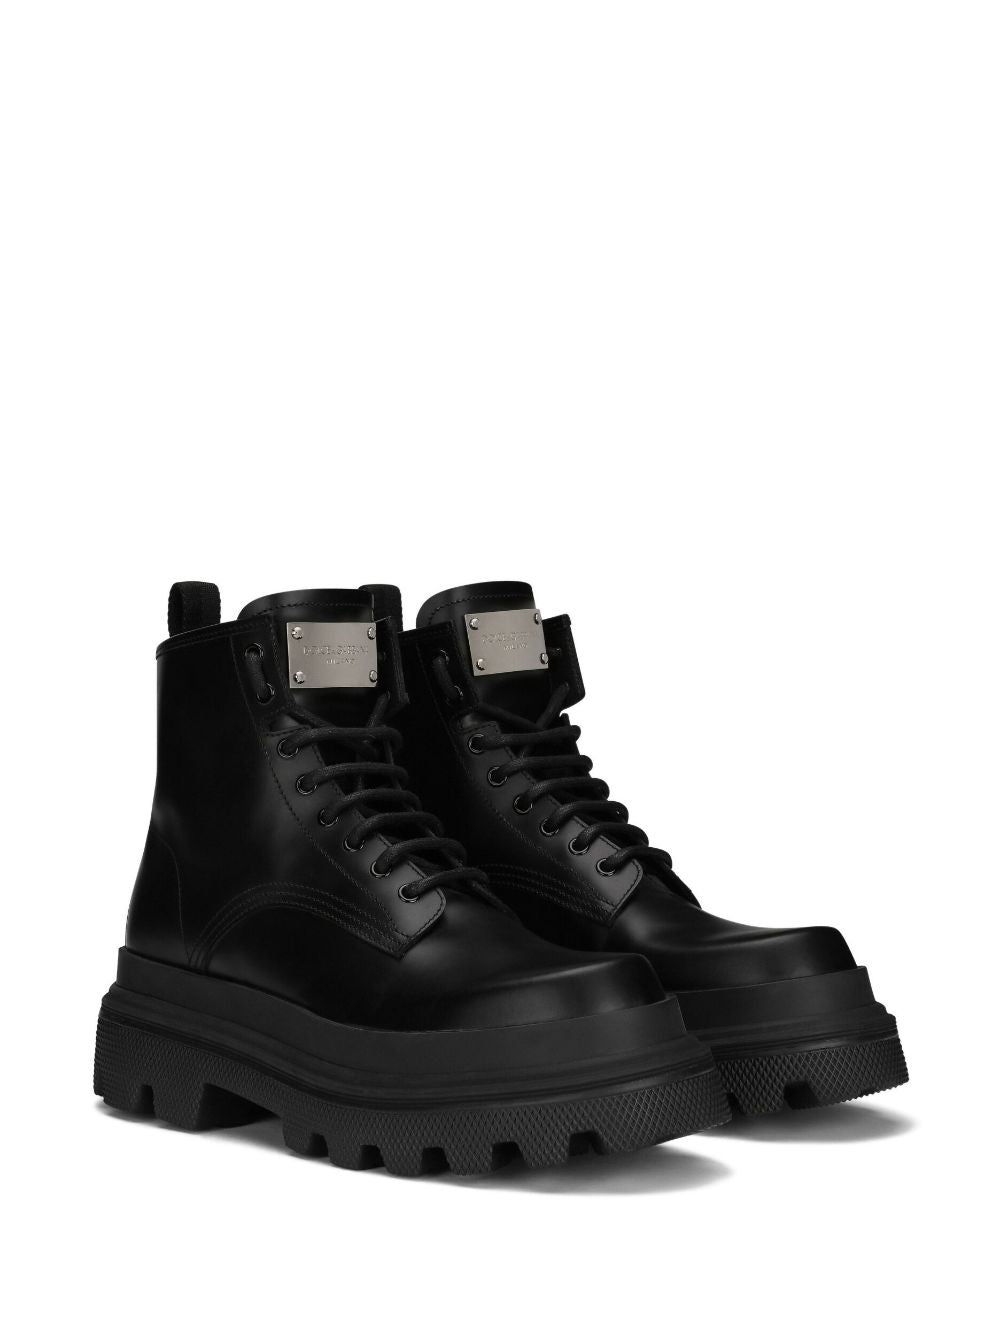 Shop Dolce & Gabbana Black Leather Laced Up Boots